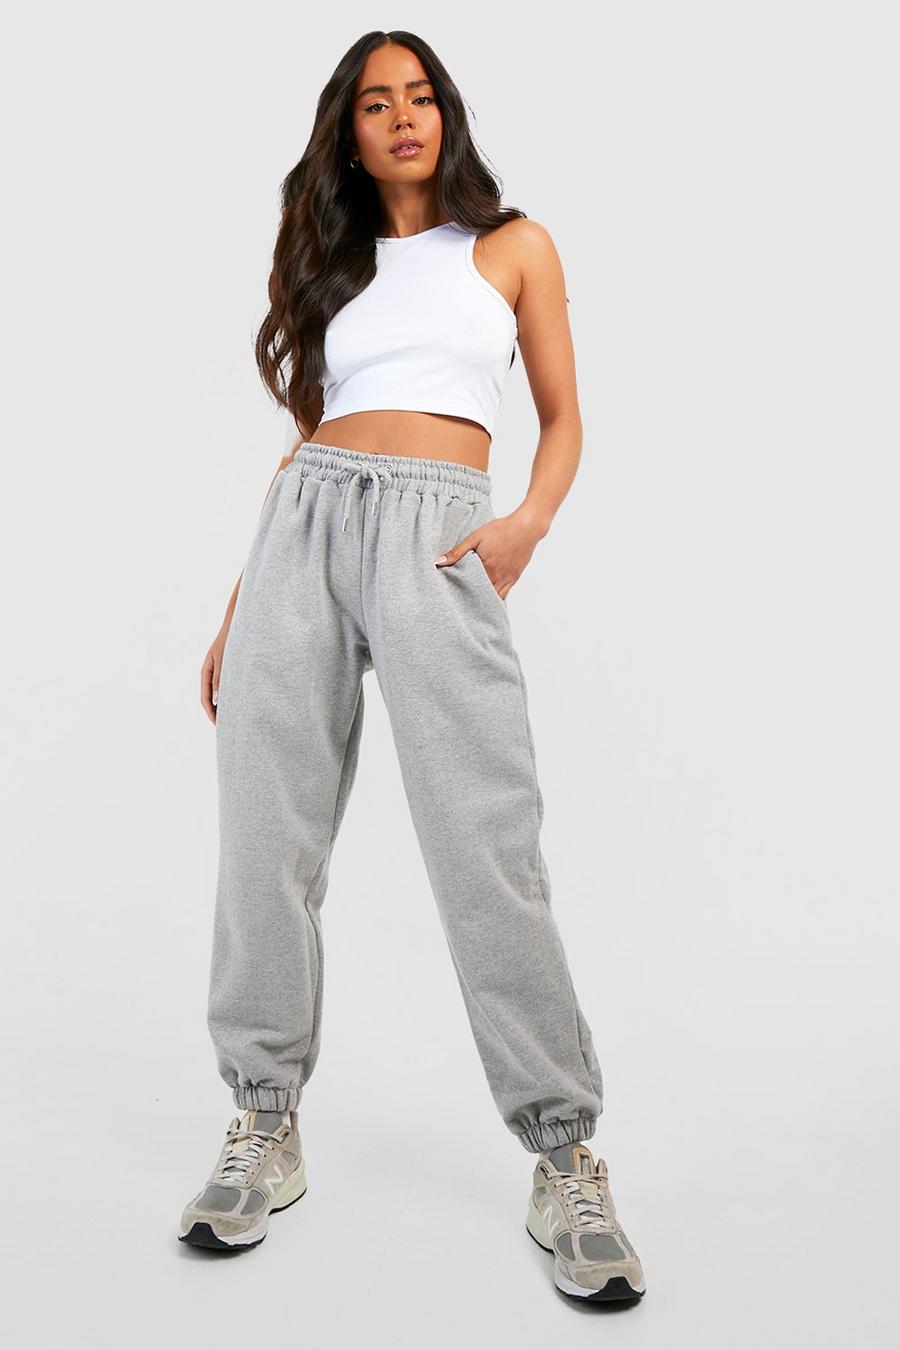 Jog On Petite Cropped Joggers in Grey